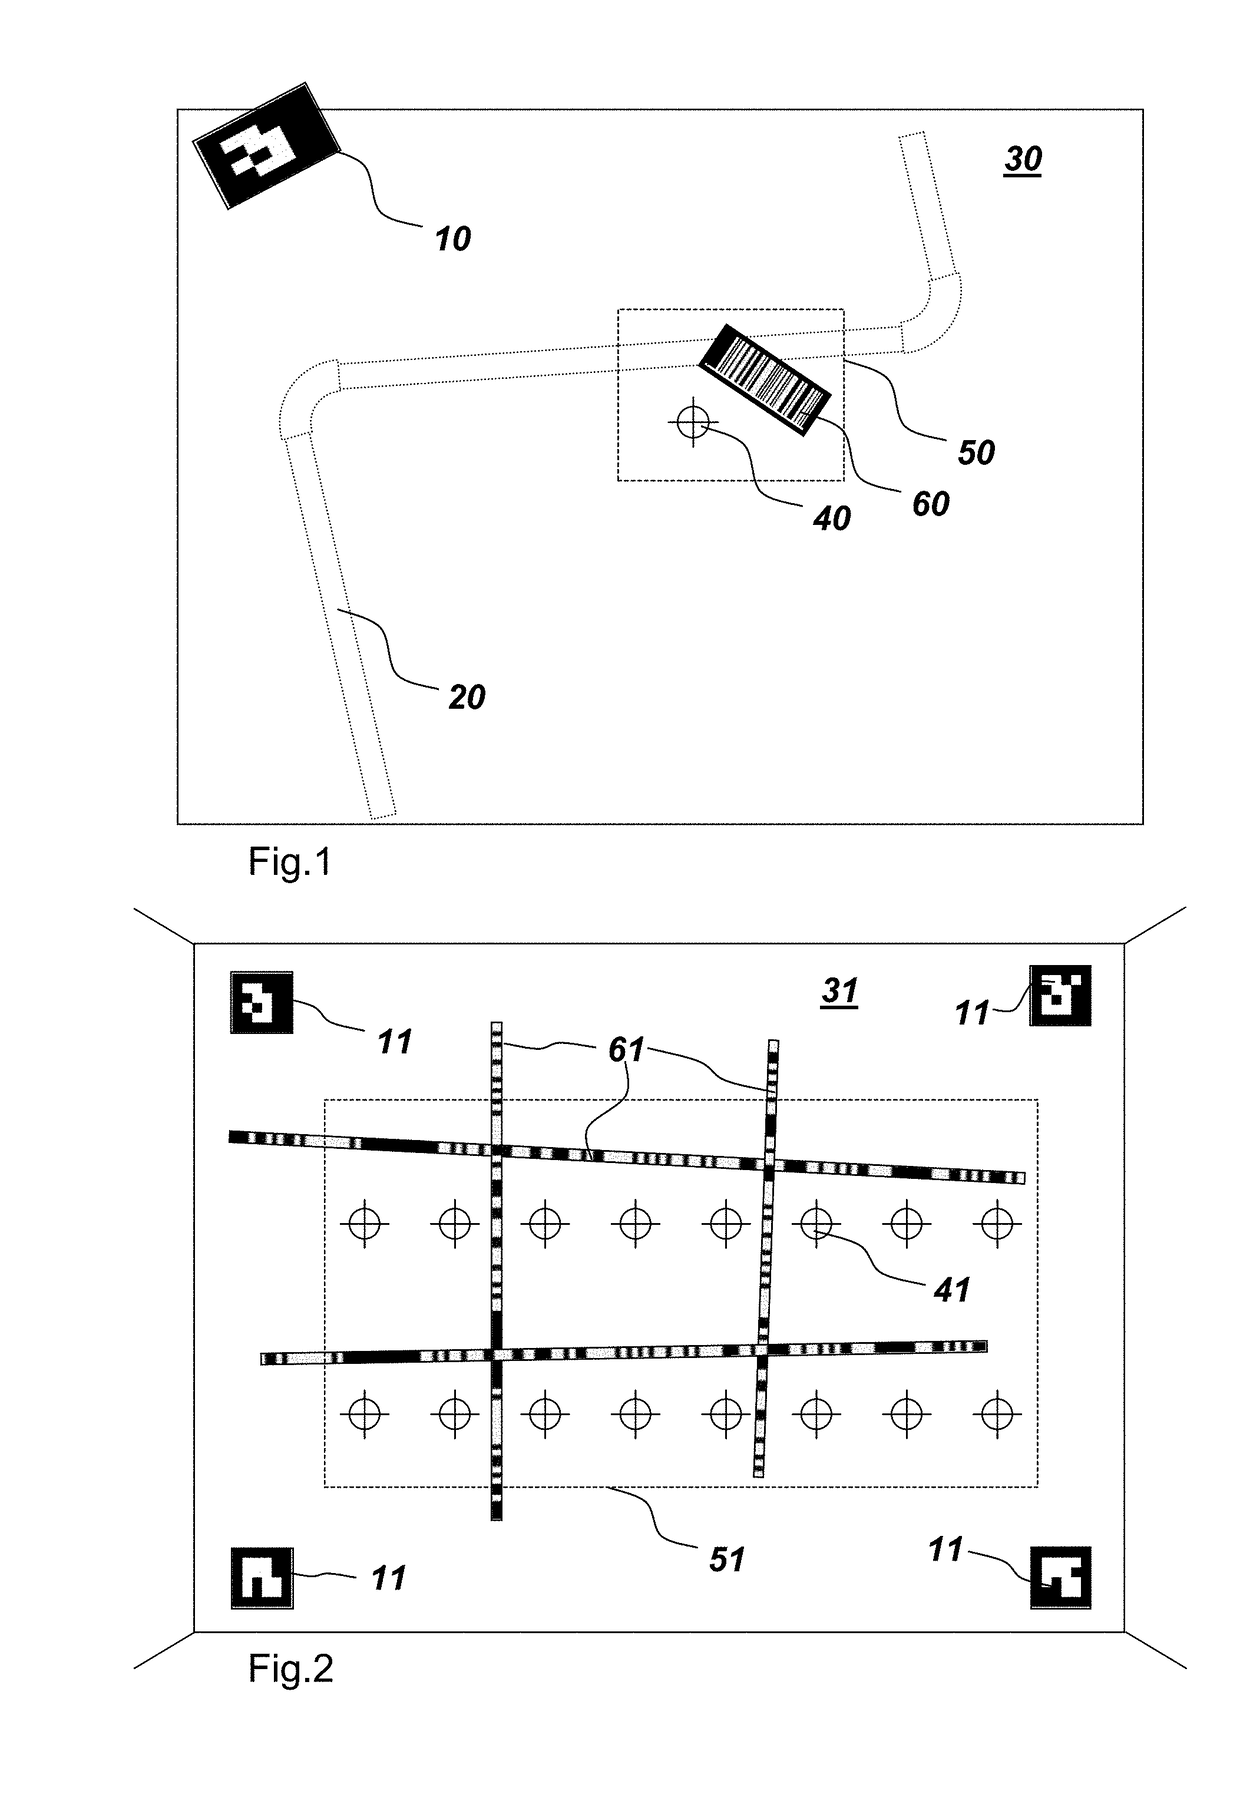 Near field maneuvering for ar-device using image tracking